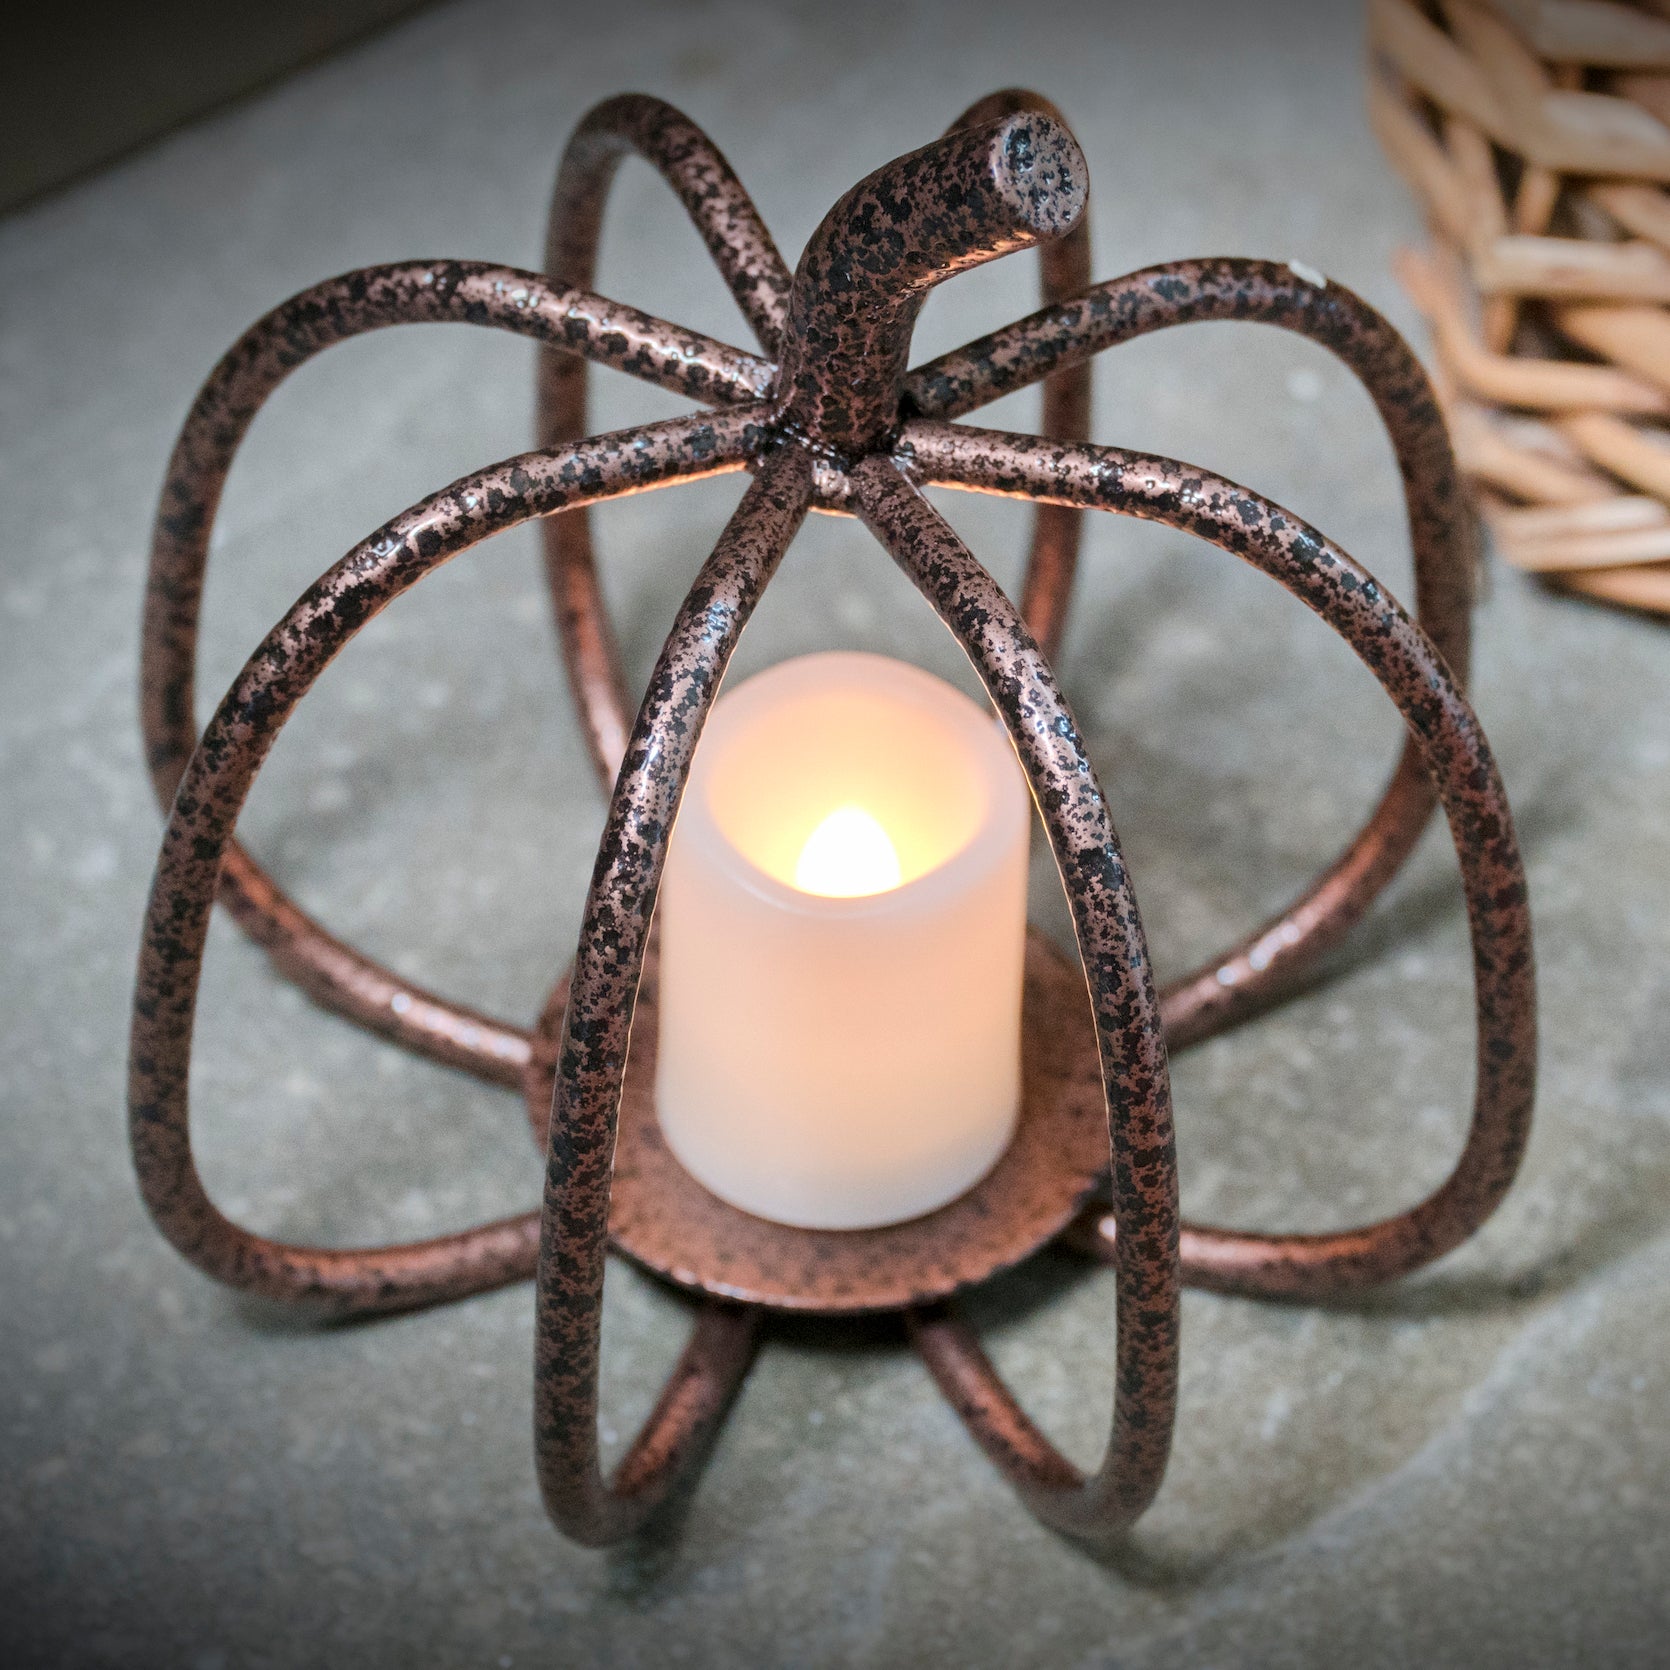 The Relaxed Gardener Pumpkin Candle Holder - Wrought Iron with Copper Finish for Tea Light and Votive Flameless Candles - Ideal for Fall, Halloween